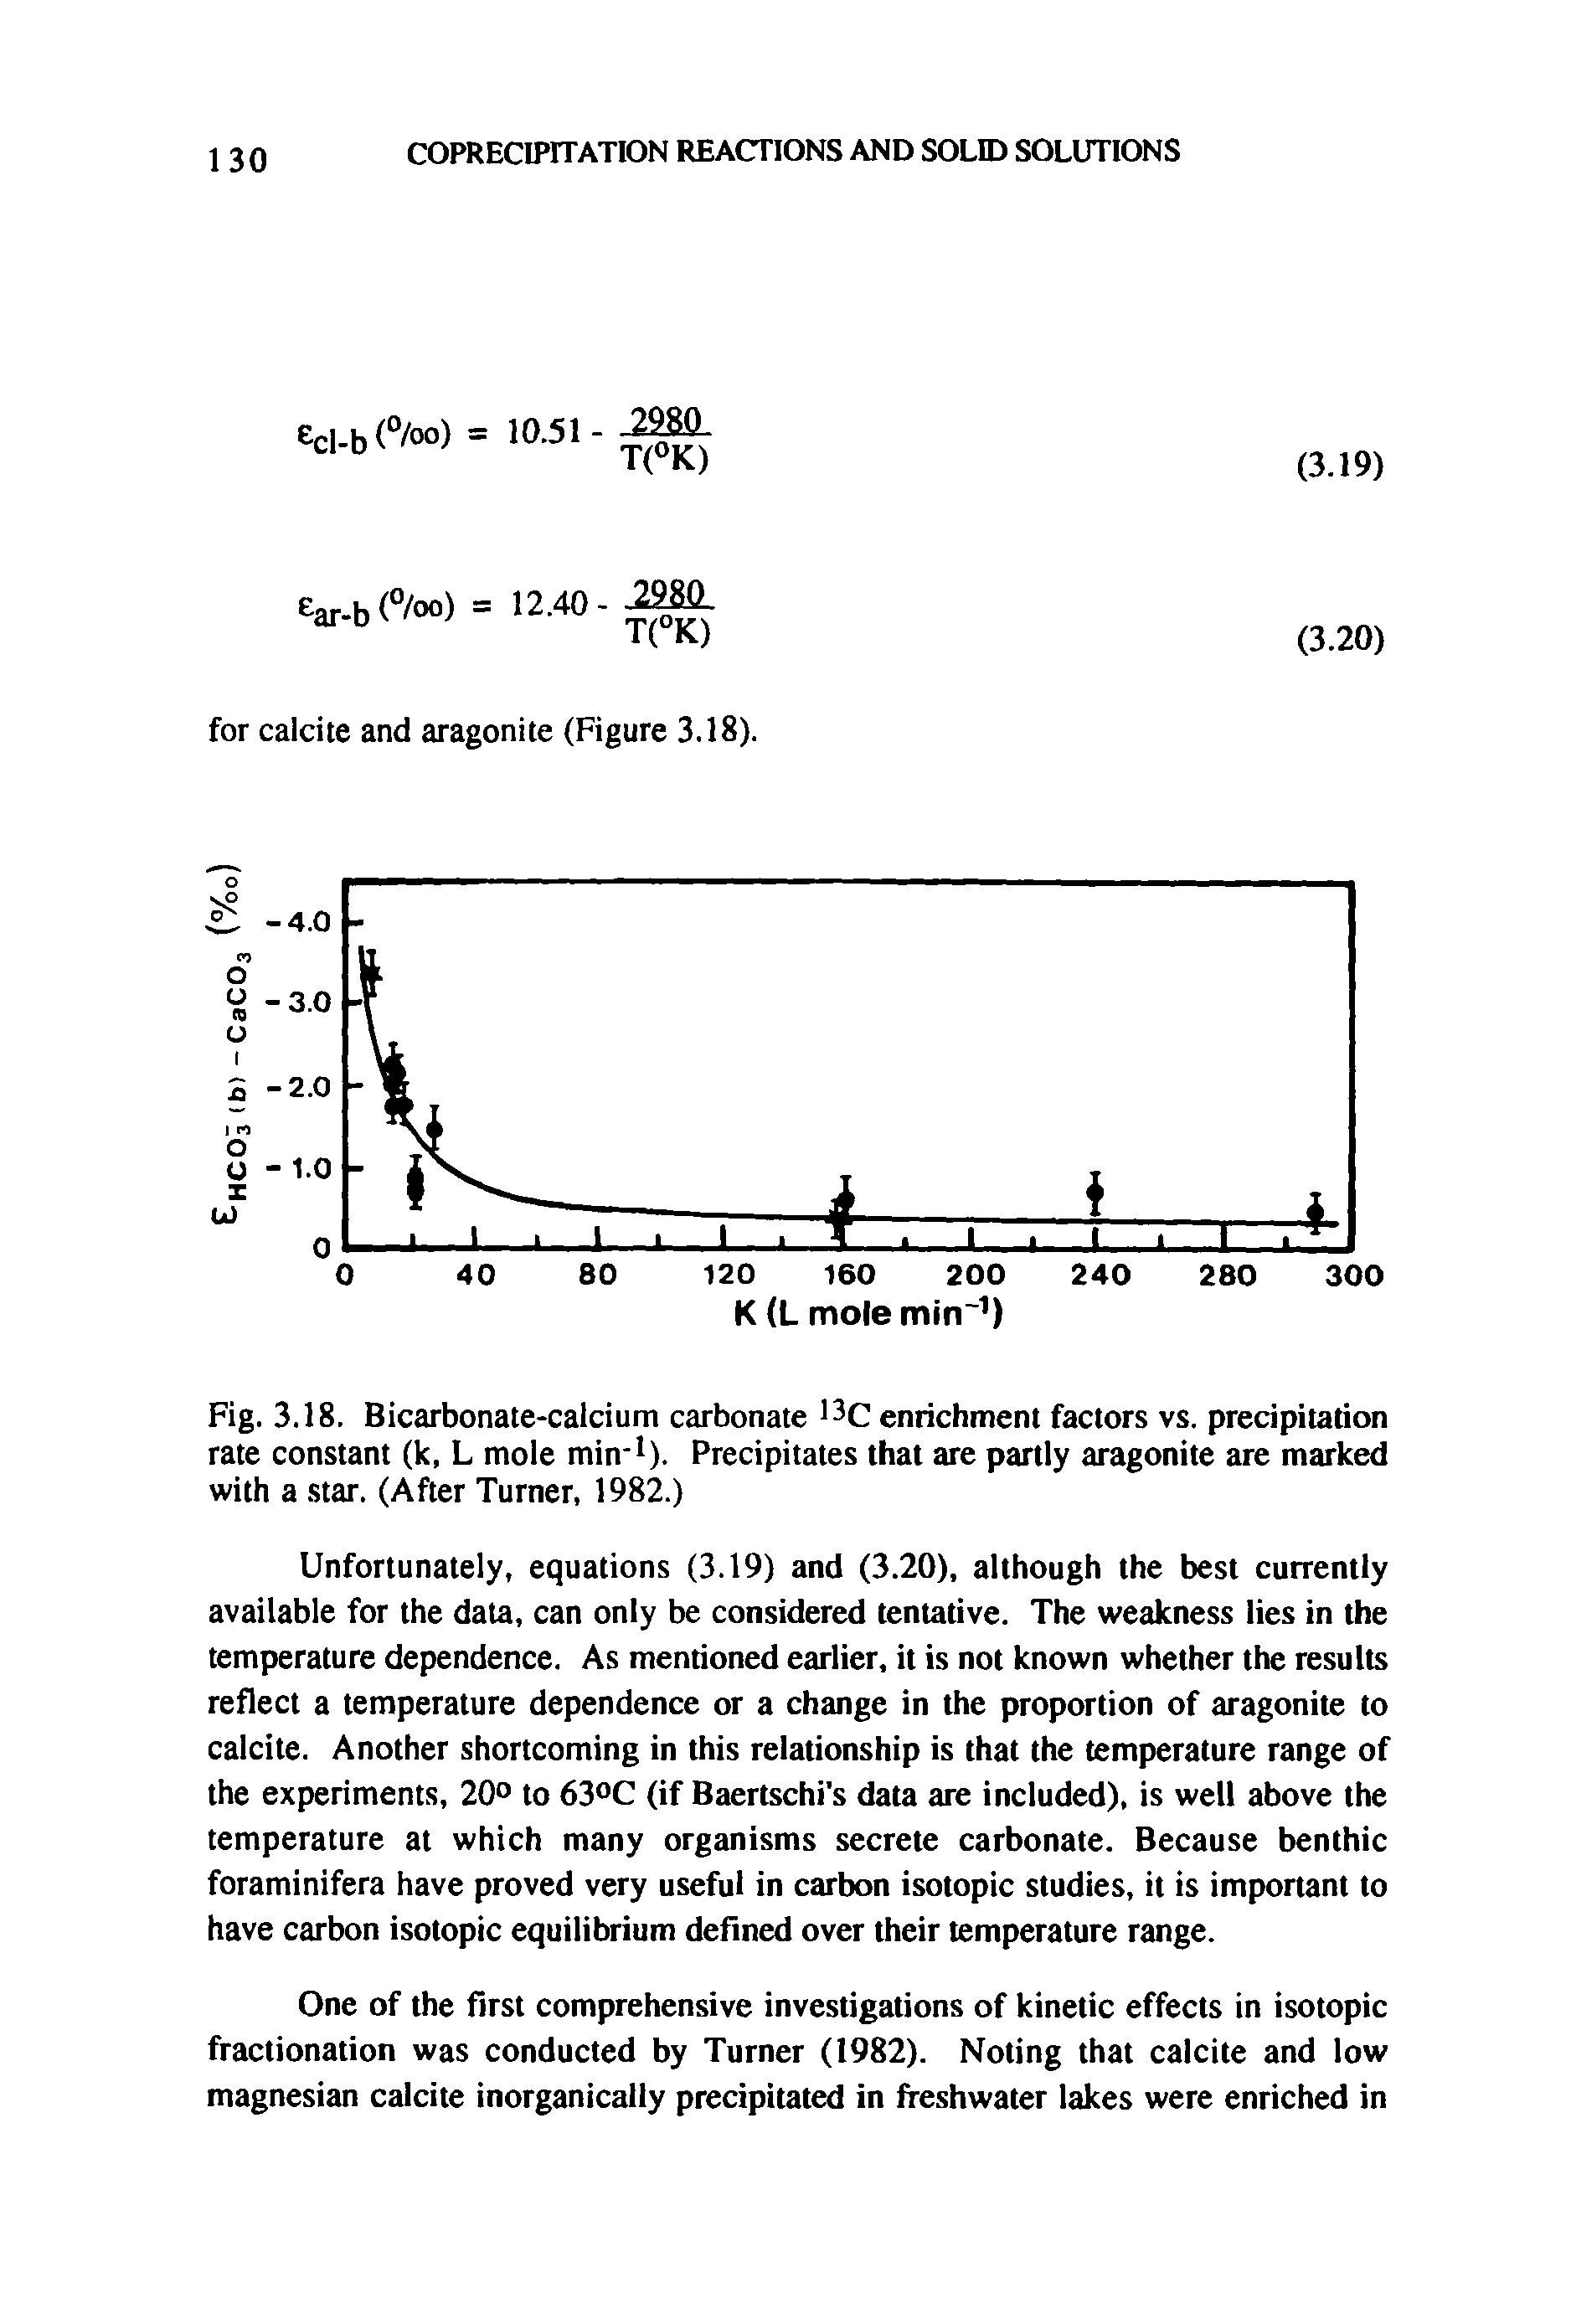 Fig. 3.18. Bicarbonate-calcium carbonate 13C enrichment factors vs. precipitation rate constant (k, L mole min 1). Precipitates that are partly aragonite are marked with a star. (After Turner, 1982.)...